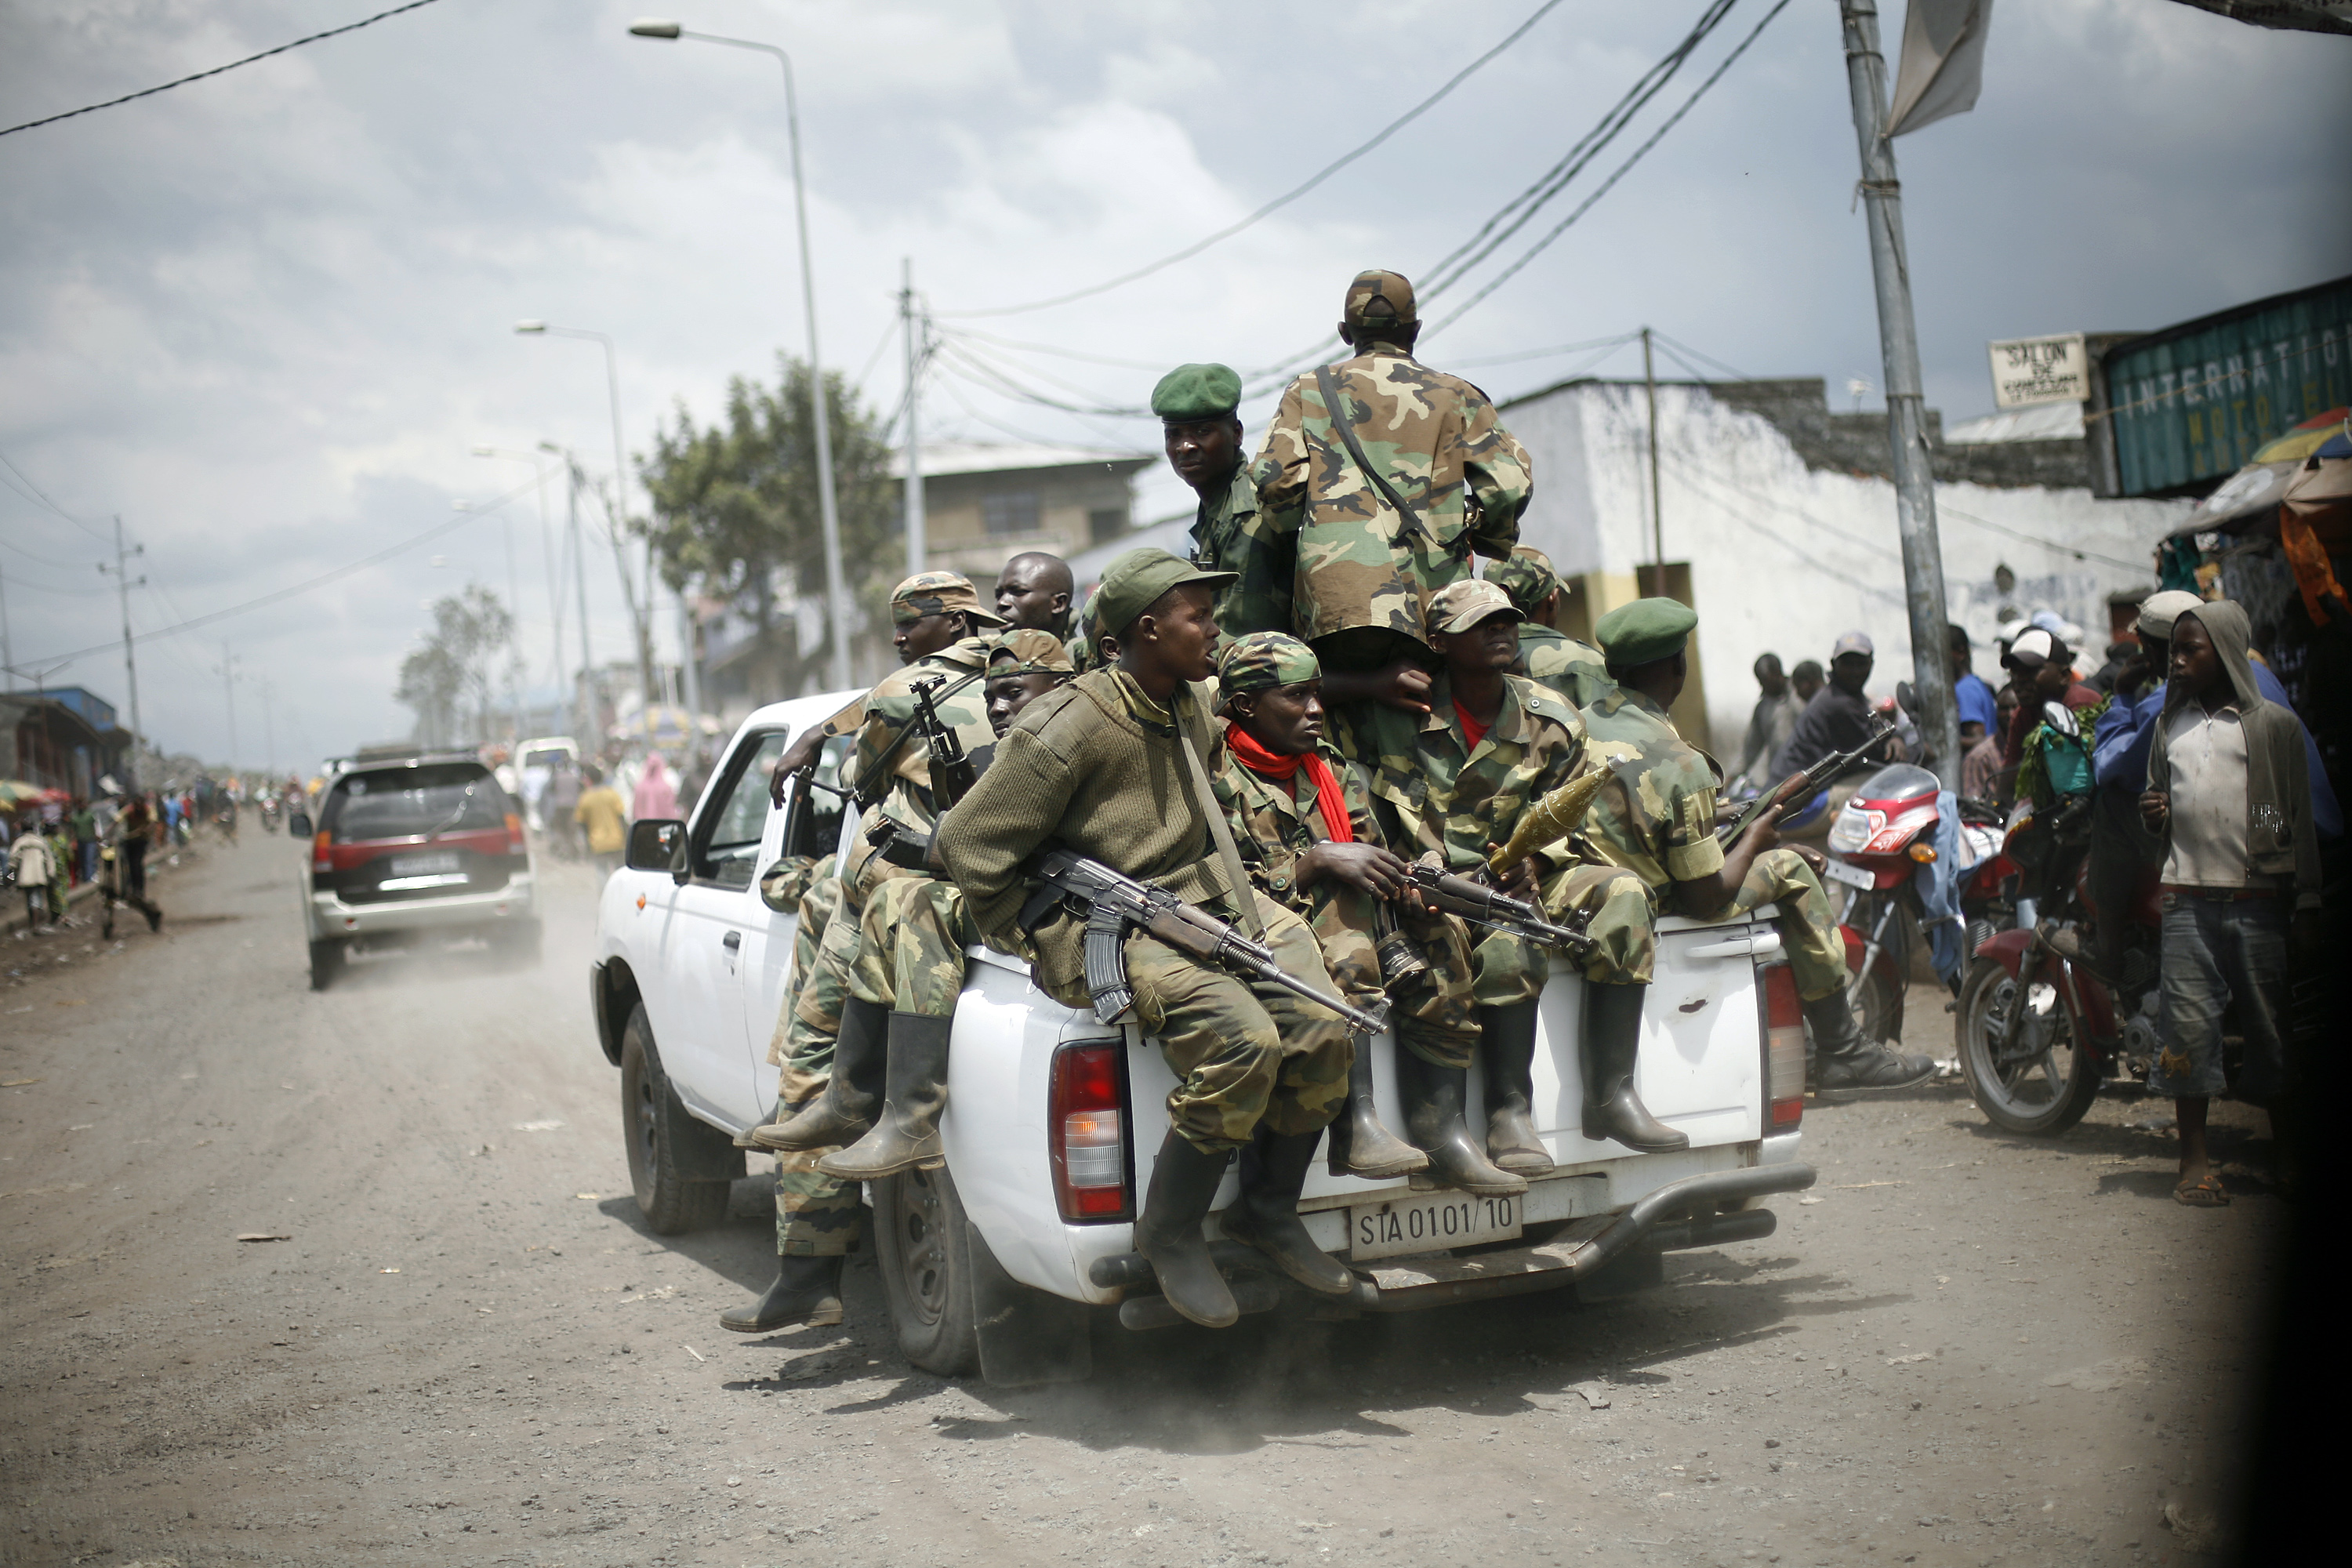 Policy Alert: Reintegrating Warlords into Congo's Army?